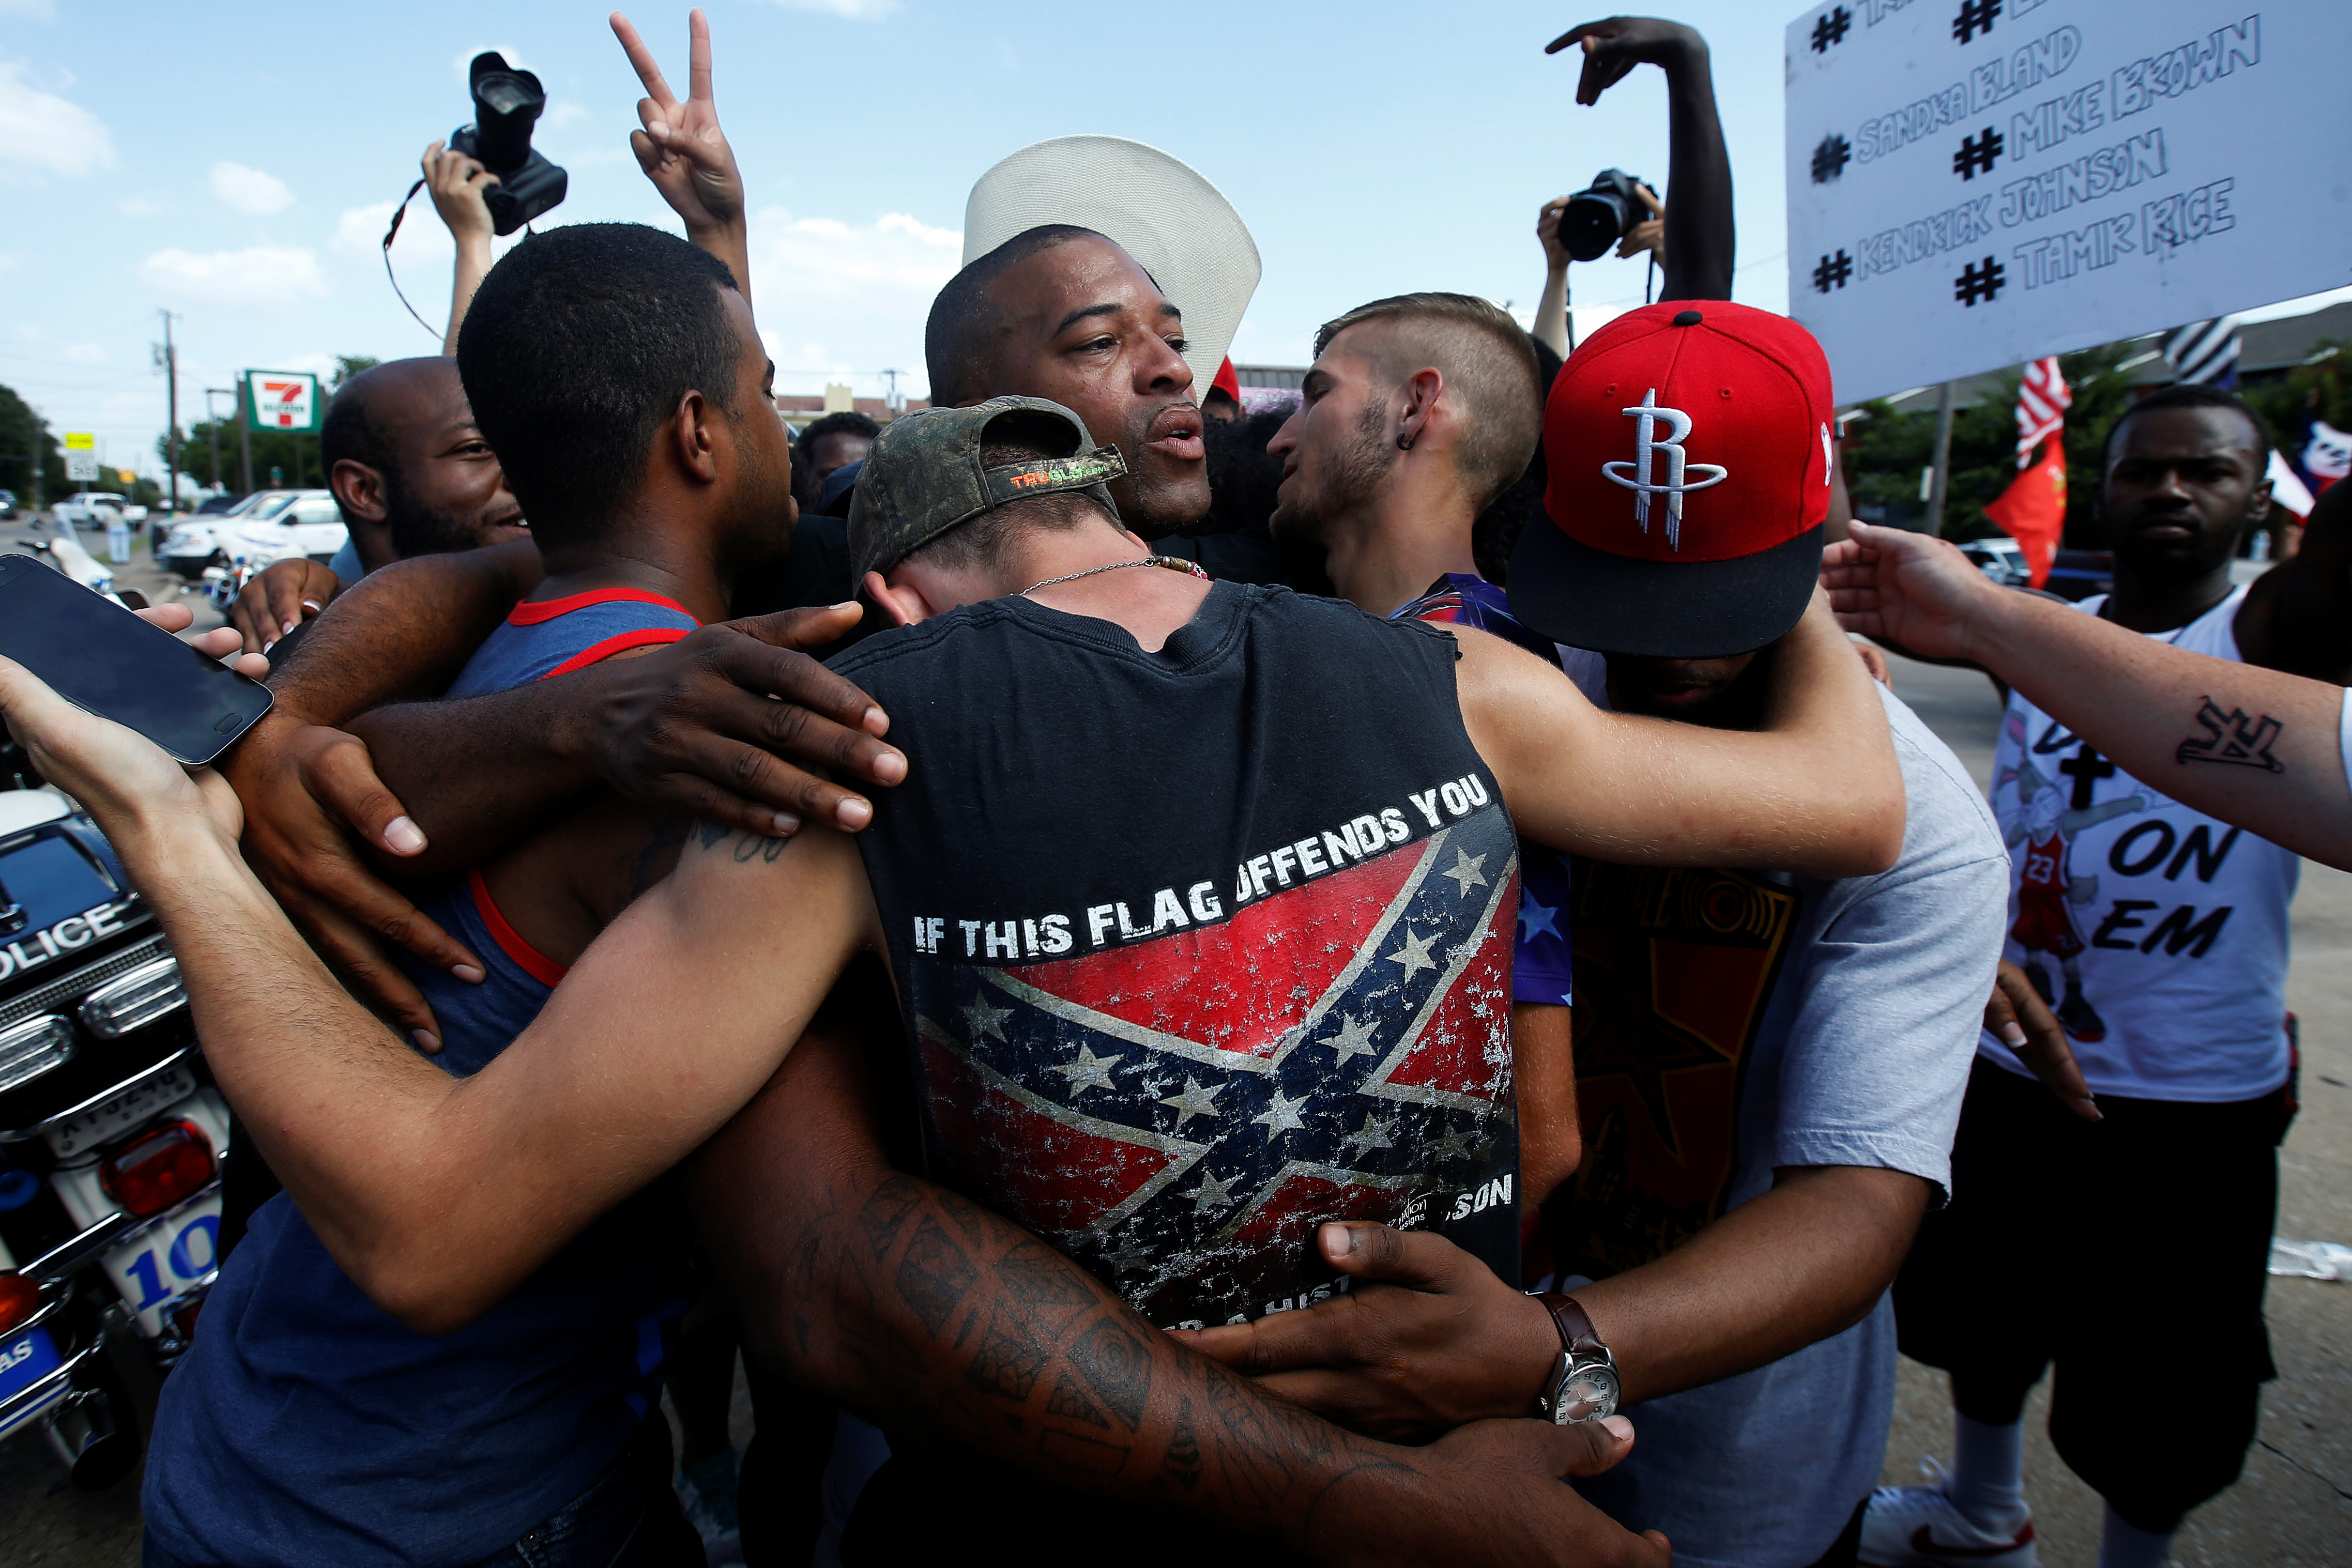 People, including a man wearing a confederate flag, hug after taking part in a prayer circle after a Black Lives Matter protest following the multiple police shootings in Dallas